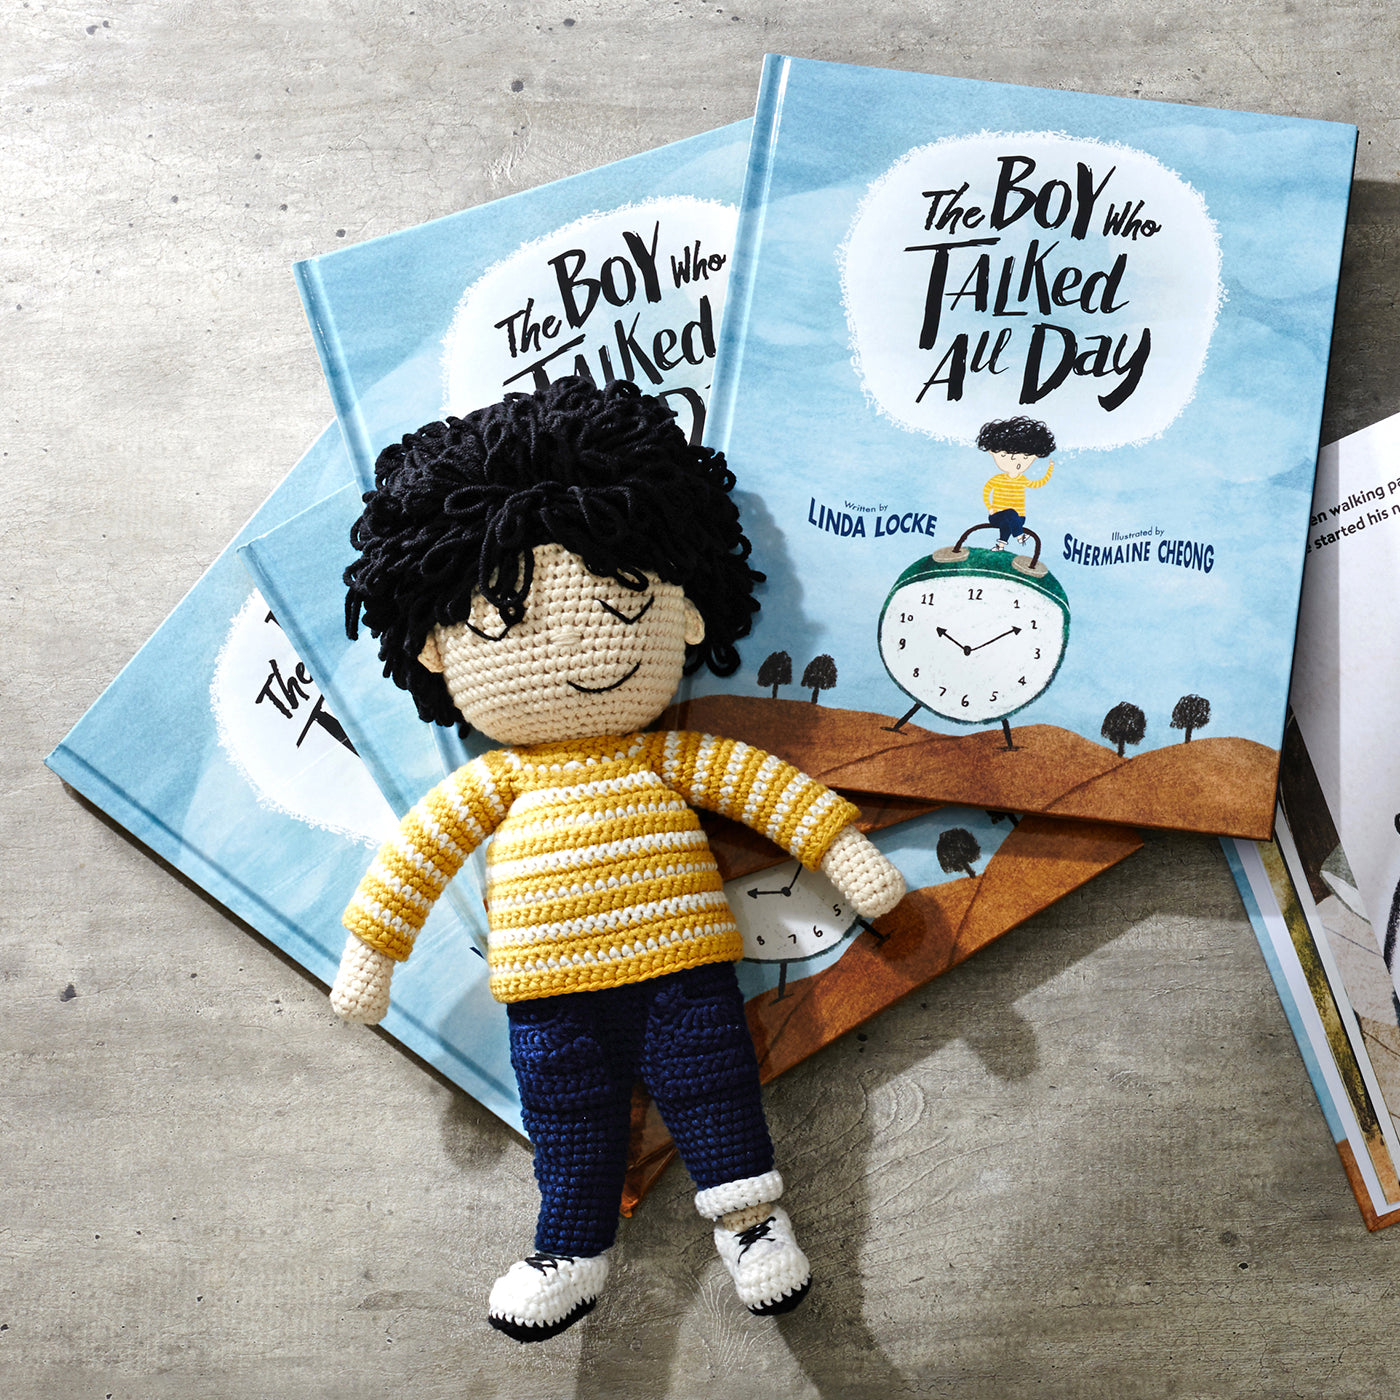 *Special Offer* The Boy Who Talked All Day & Talk Talk Boy (1 Book & 1 Soft Toy)